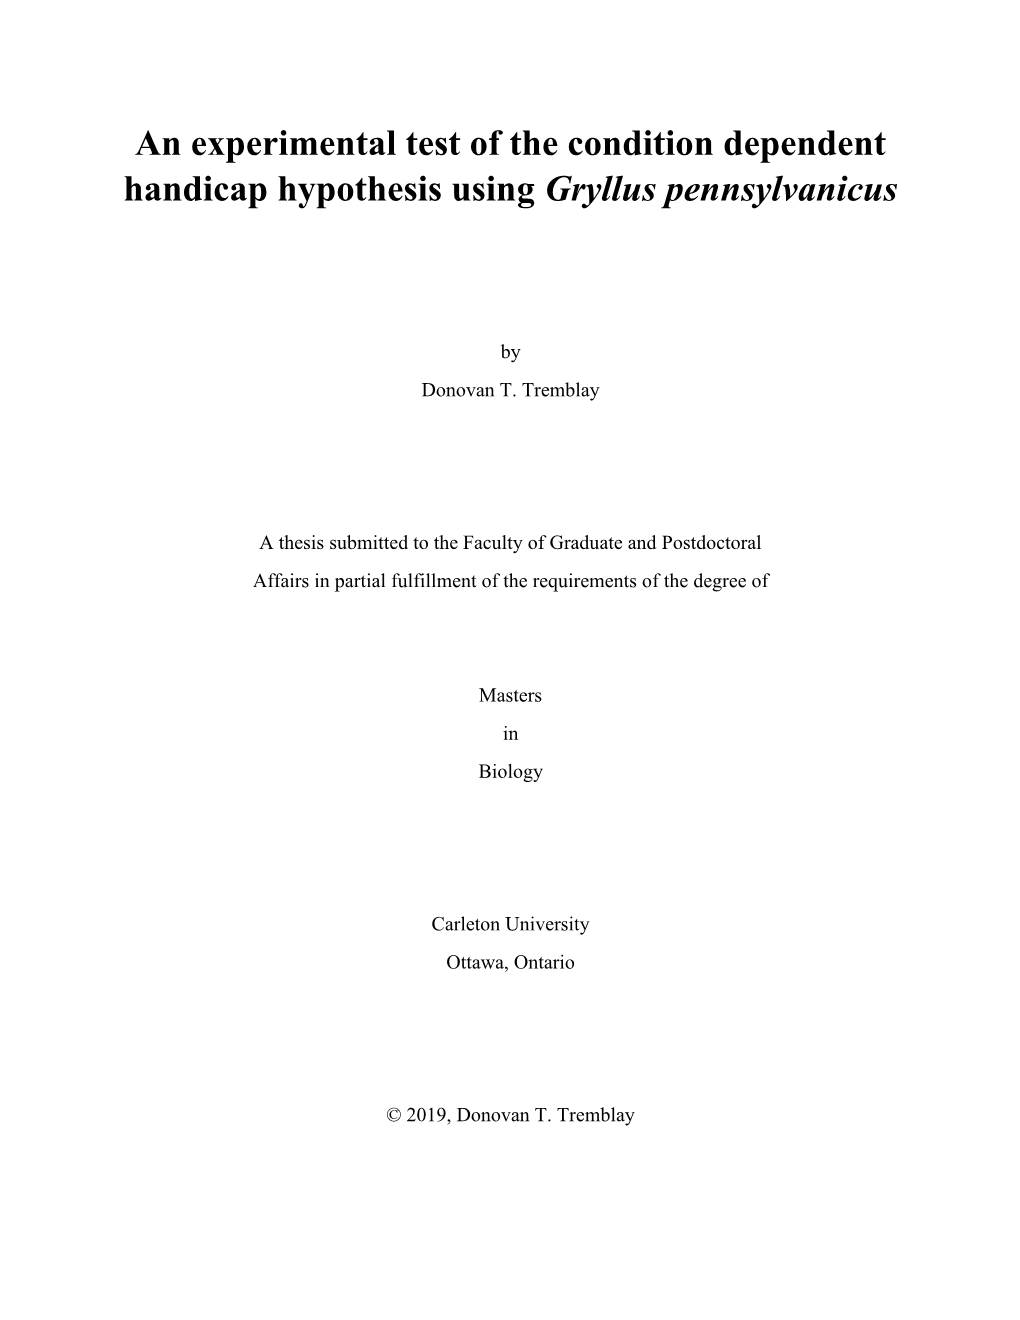 An Experimental Test of the Condition Dependent Handicap Hypothesis Using Gryllus Pennsylvanicus